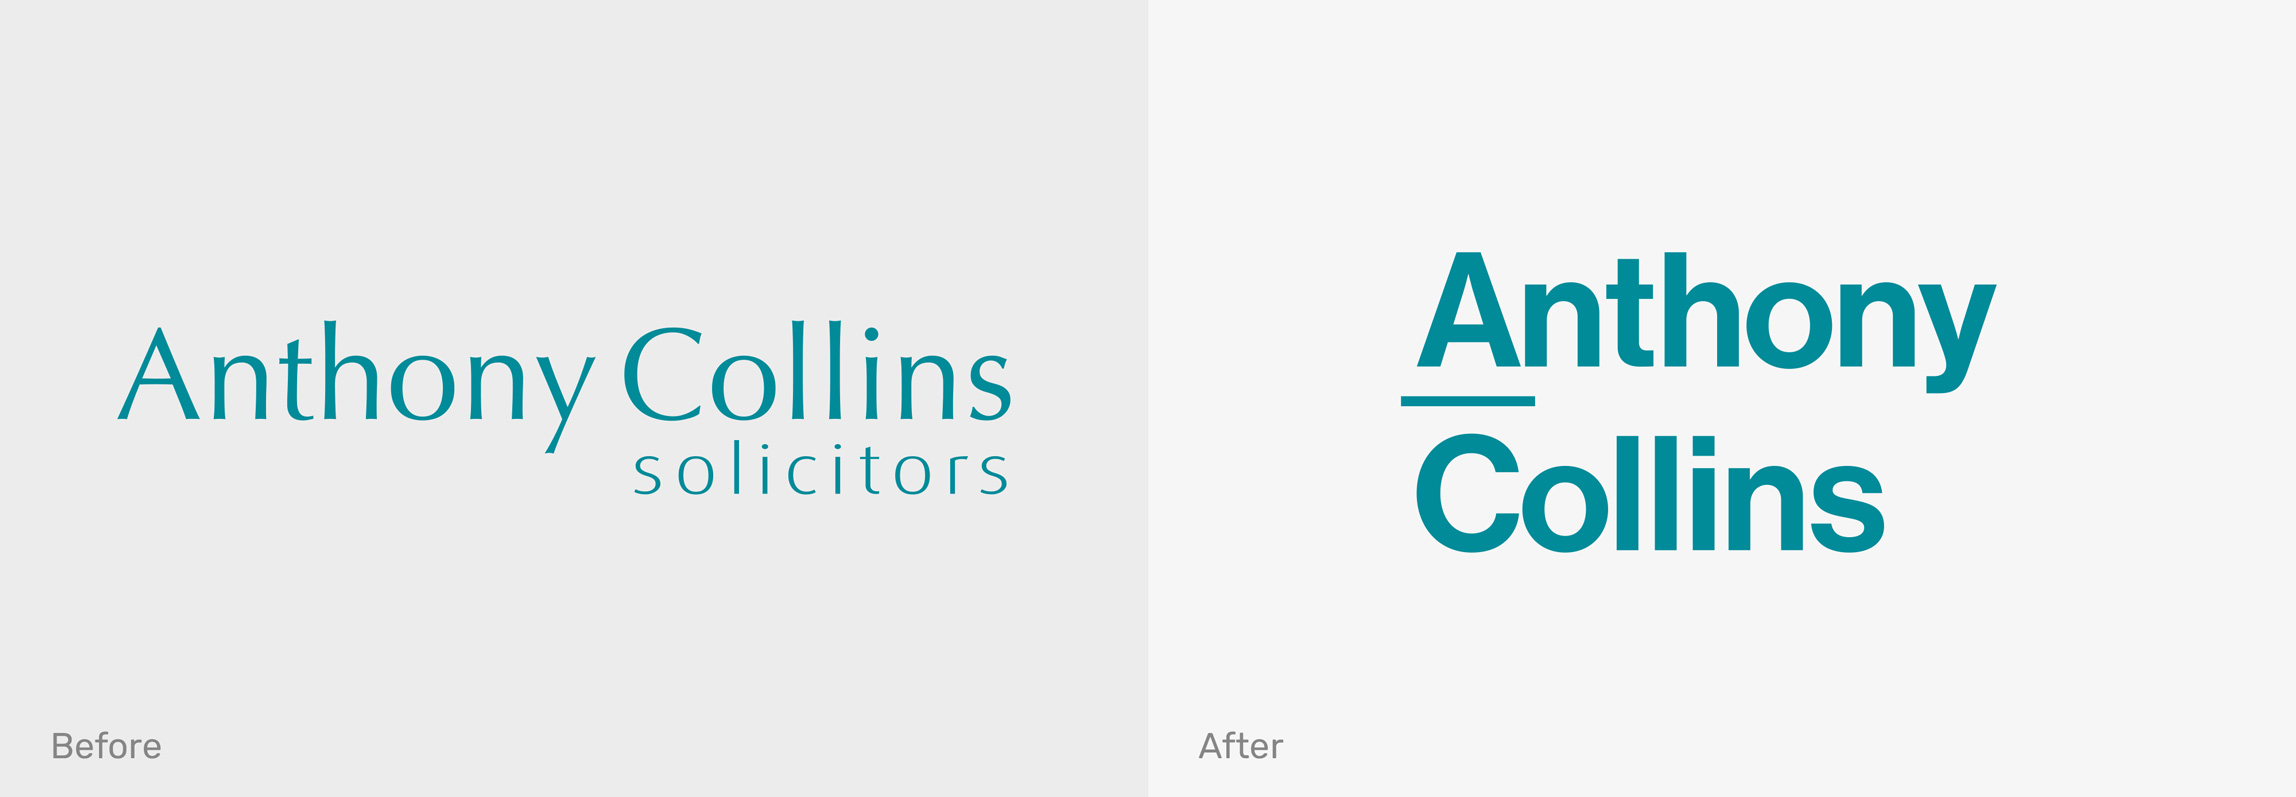 Anthony Collins Solicitors new logo before and after